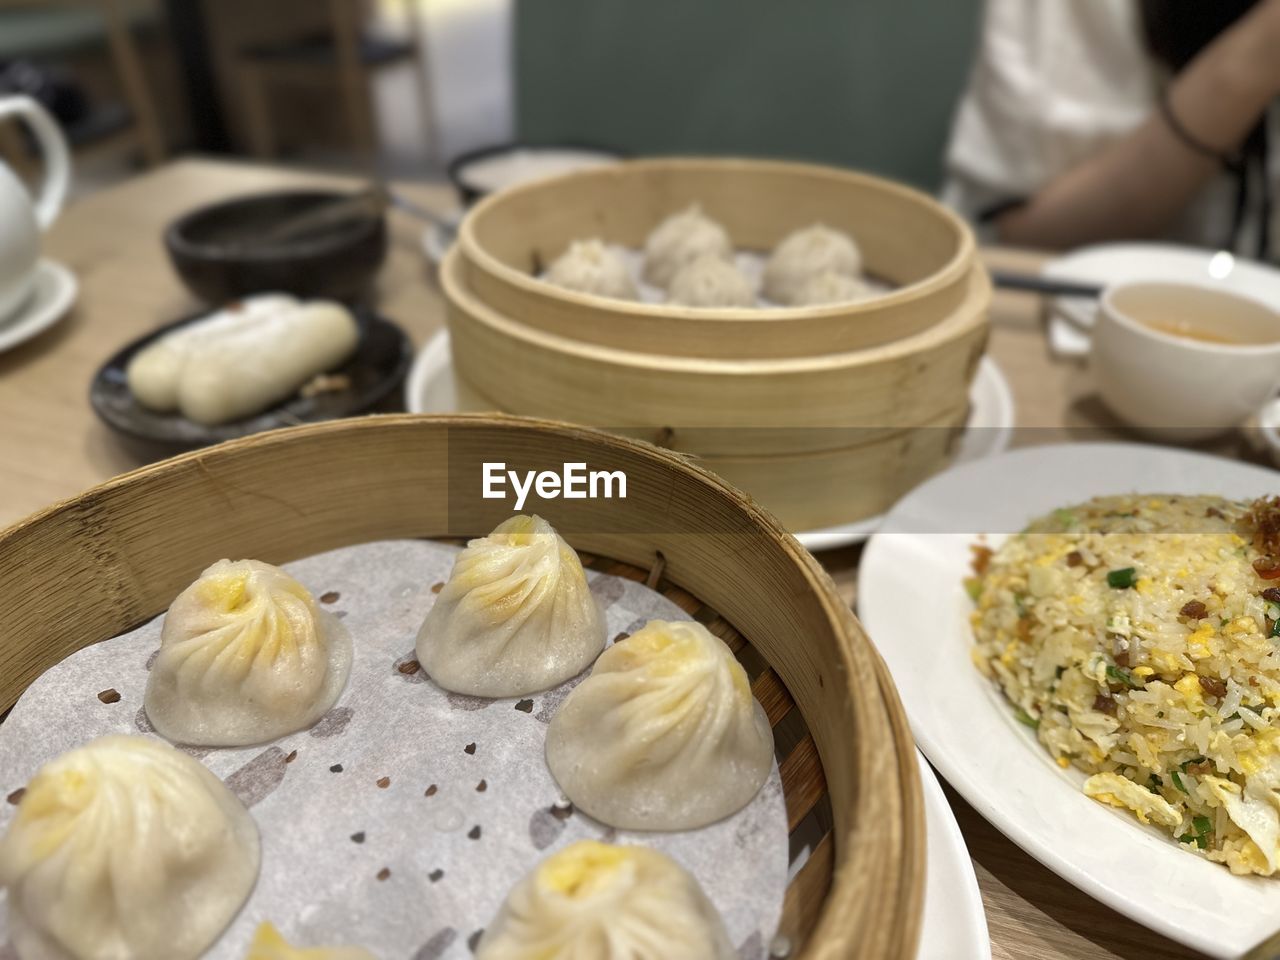 food and drink, food, dim sum, xiaolongbao, freshness, dumpling, buuz, mandu, chinese food, asian food, dish, chinese dumpling, cuisine, healthy eating, wellbeing, indoors, meal, manti, steamed, khinkali, table, restaurant, business, bowl, close-up, still life, no people, wonton, food and drink industry, container